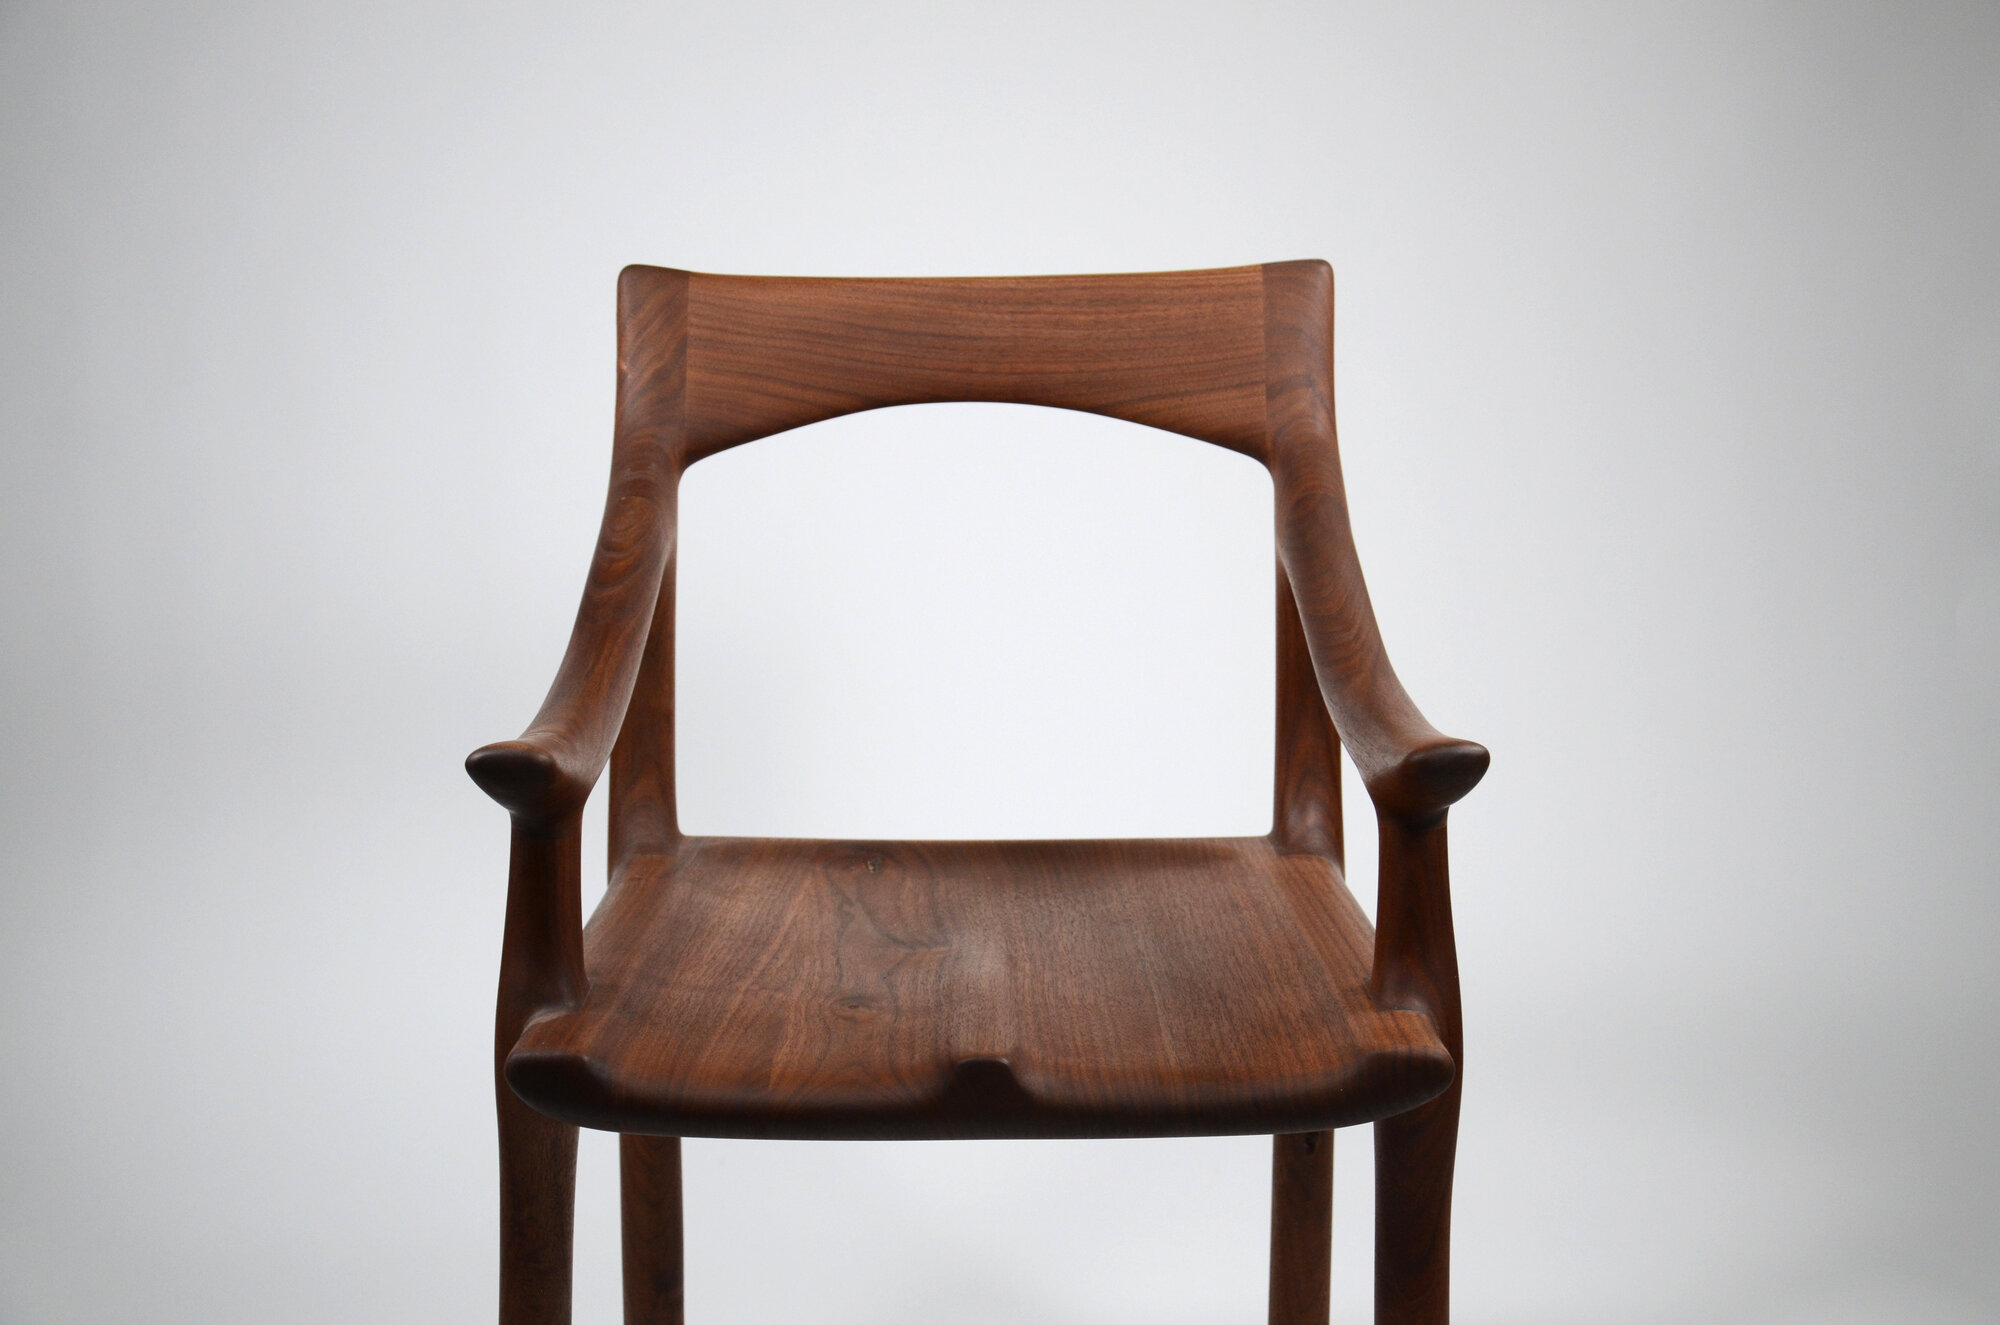 Maloof-Inspired Low-Back Chair